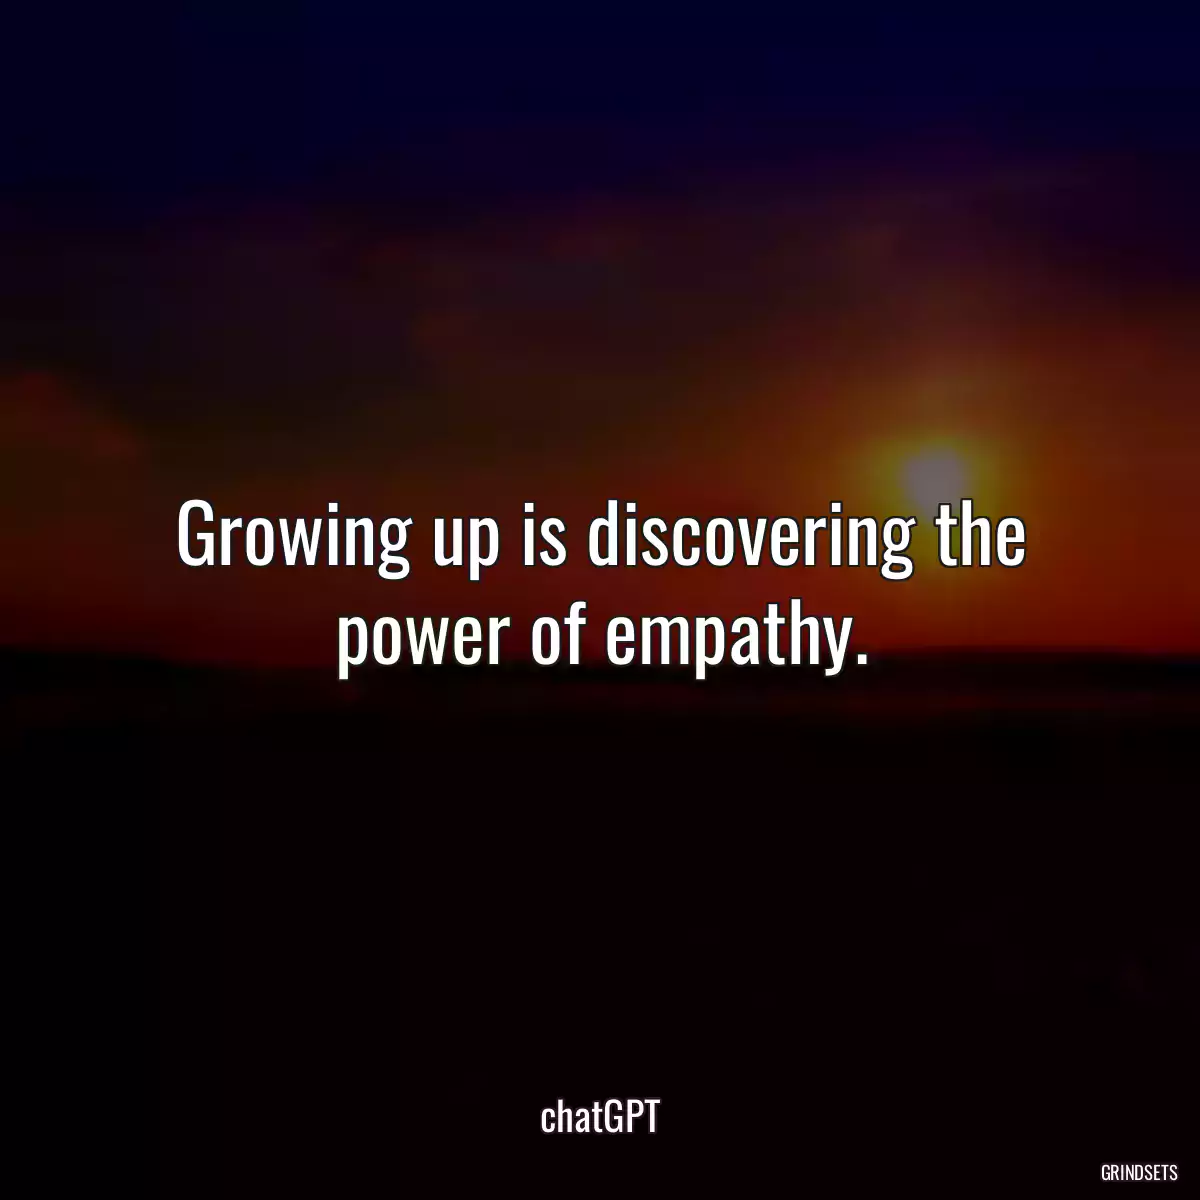 Growing up is discovering the power of empathy.